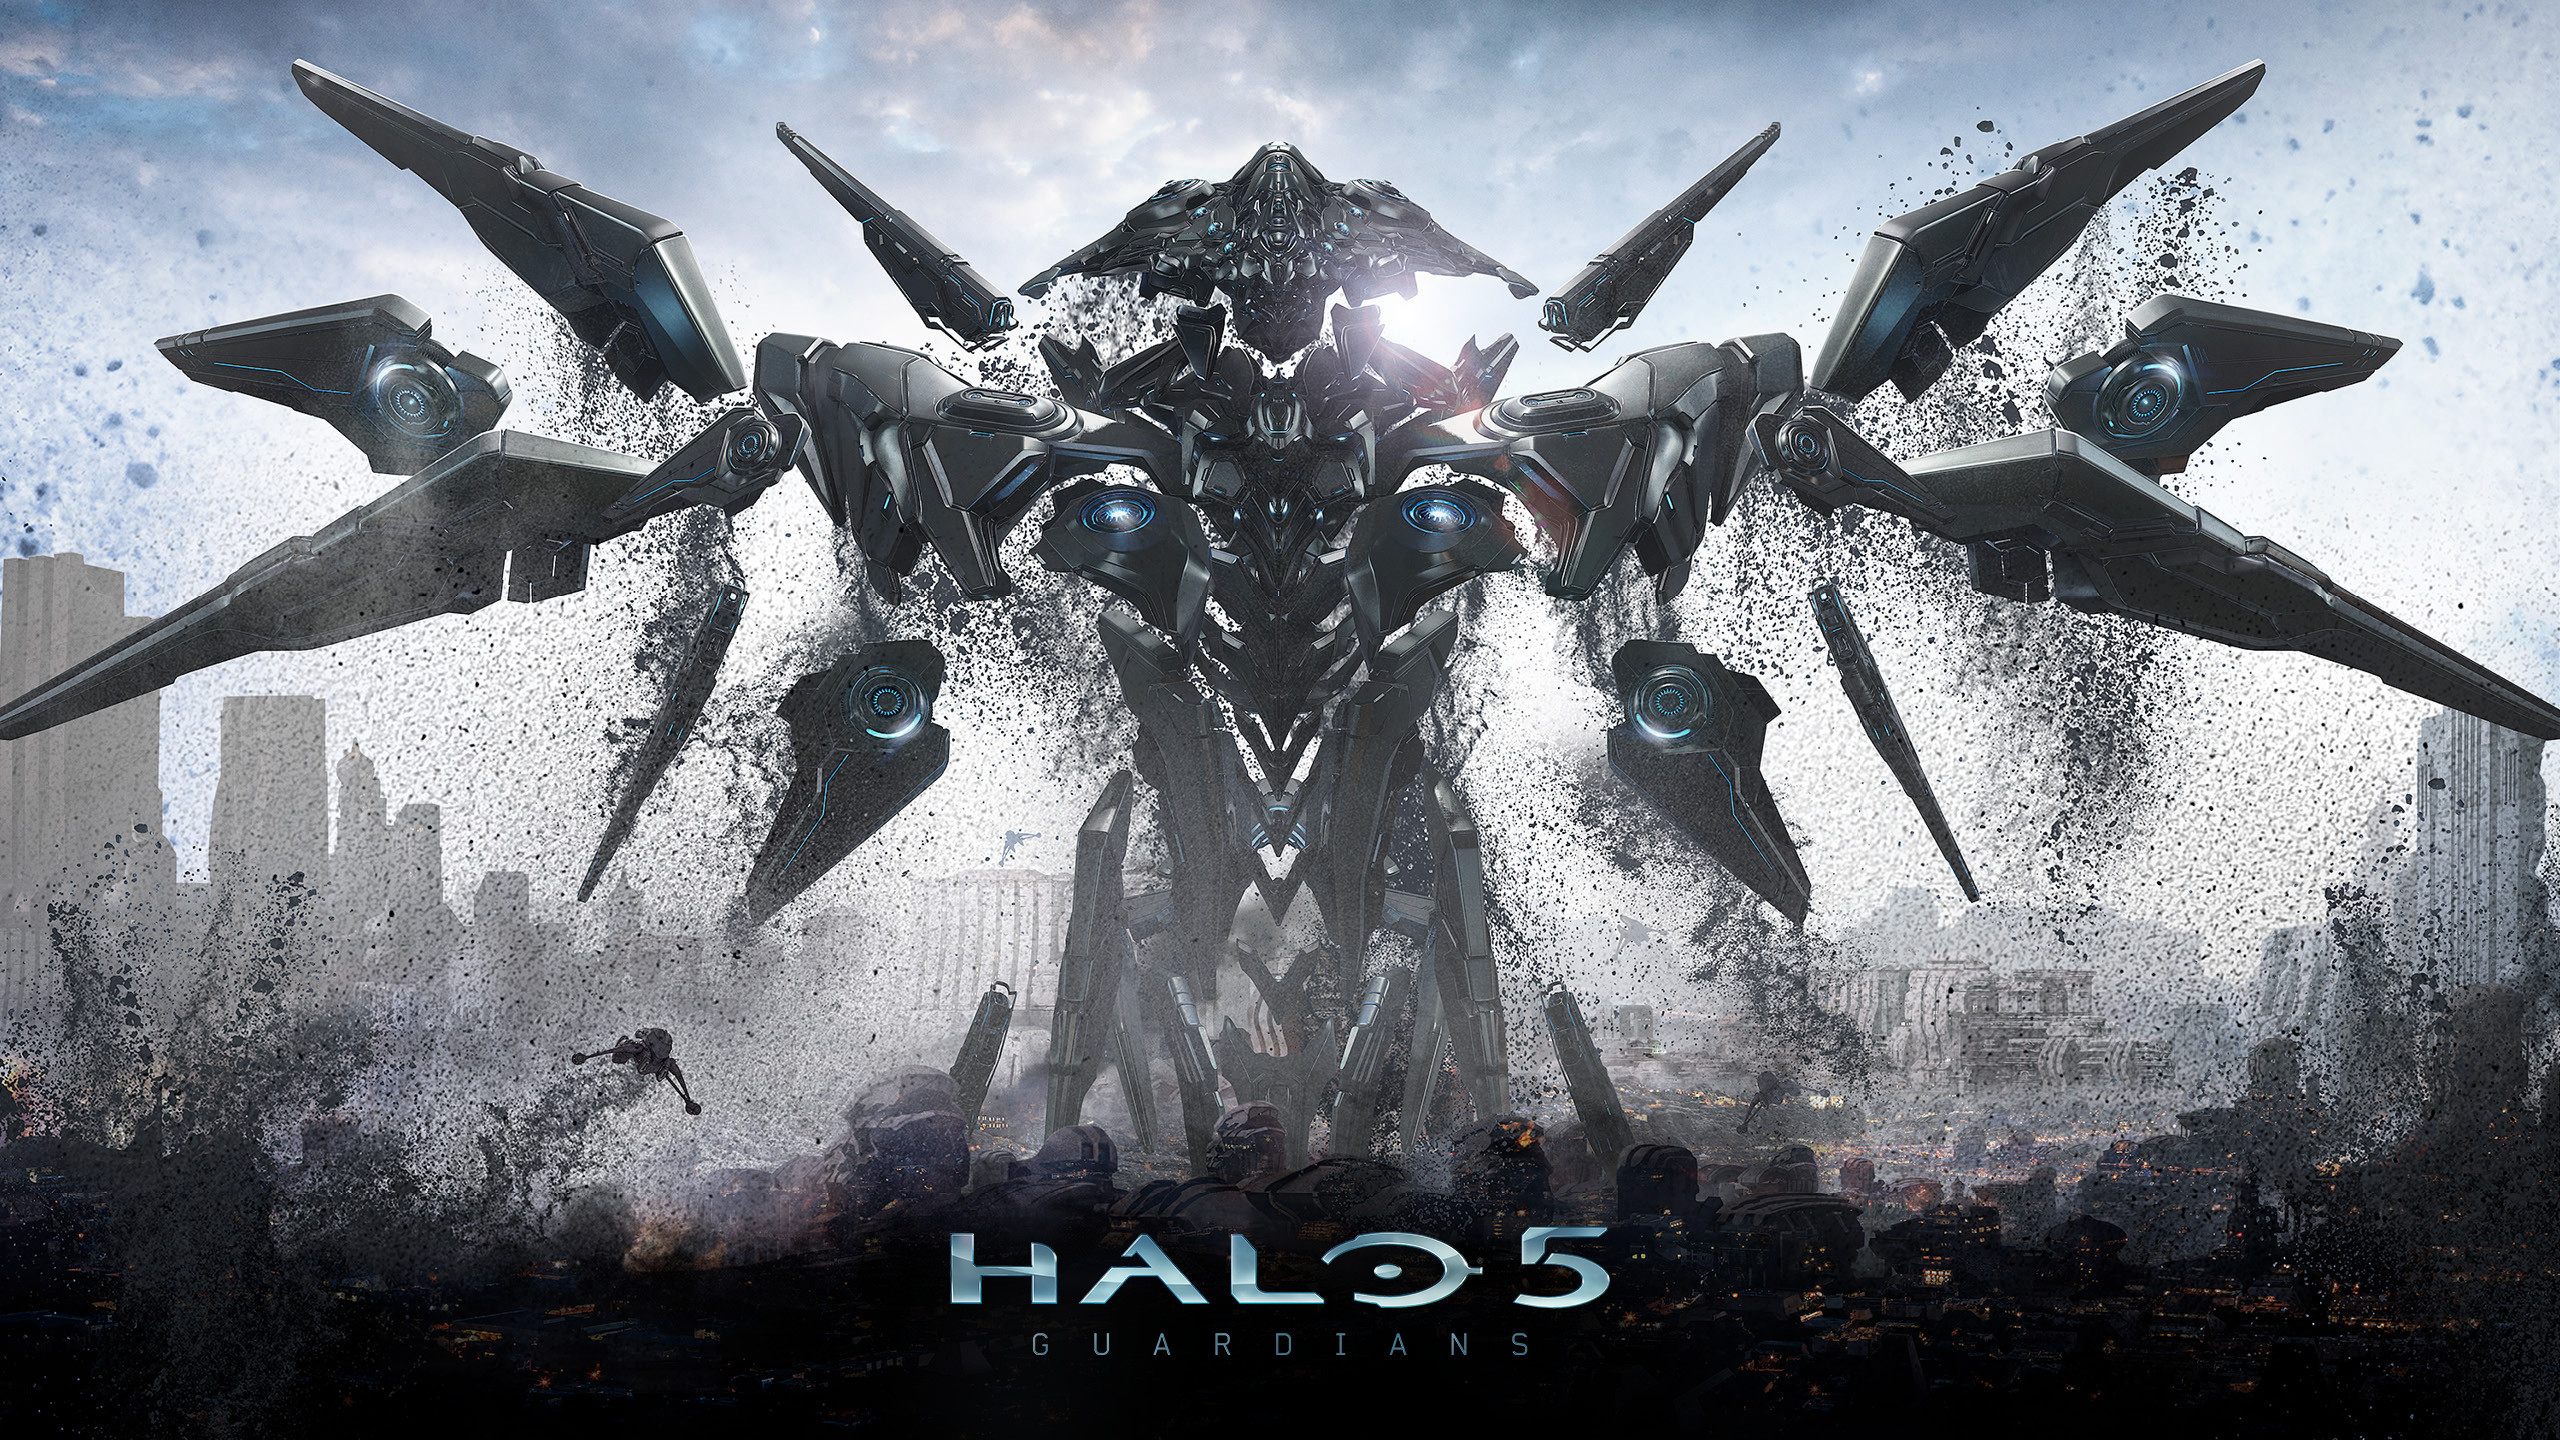 halo 5 guardians free download full version pc